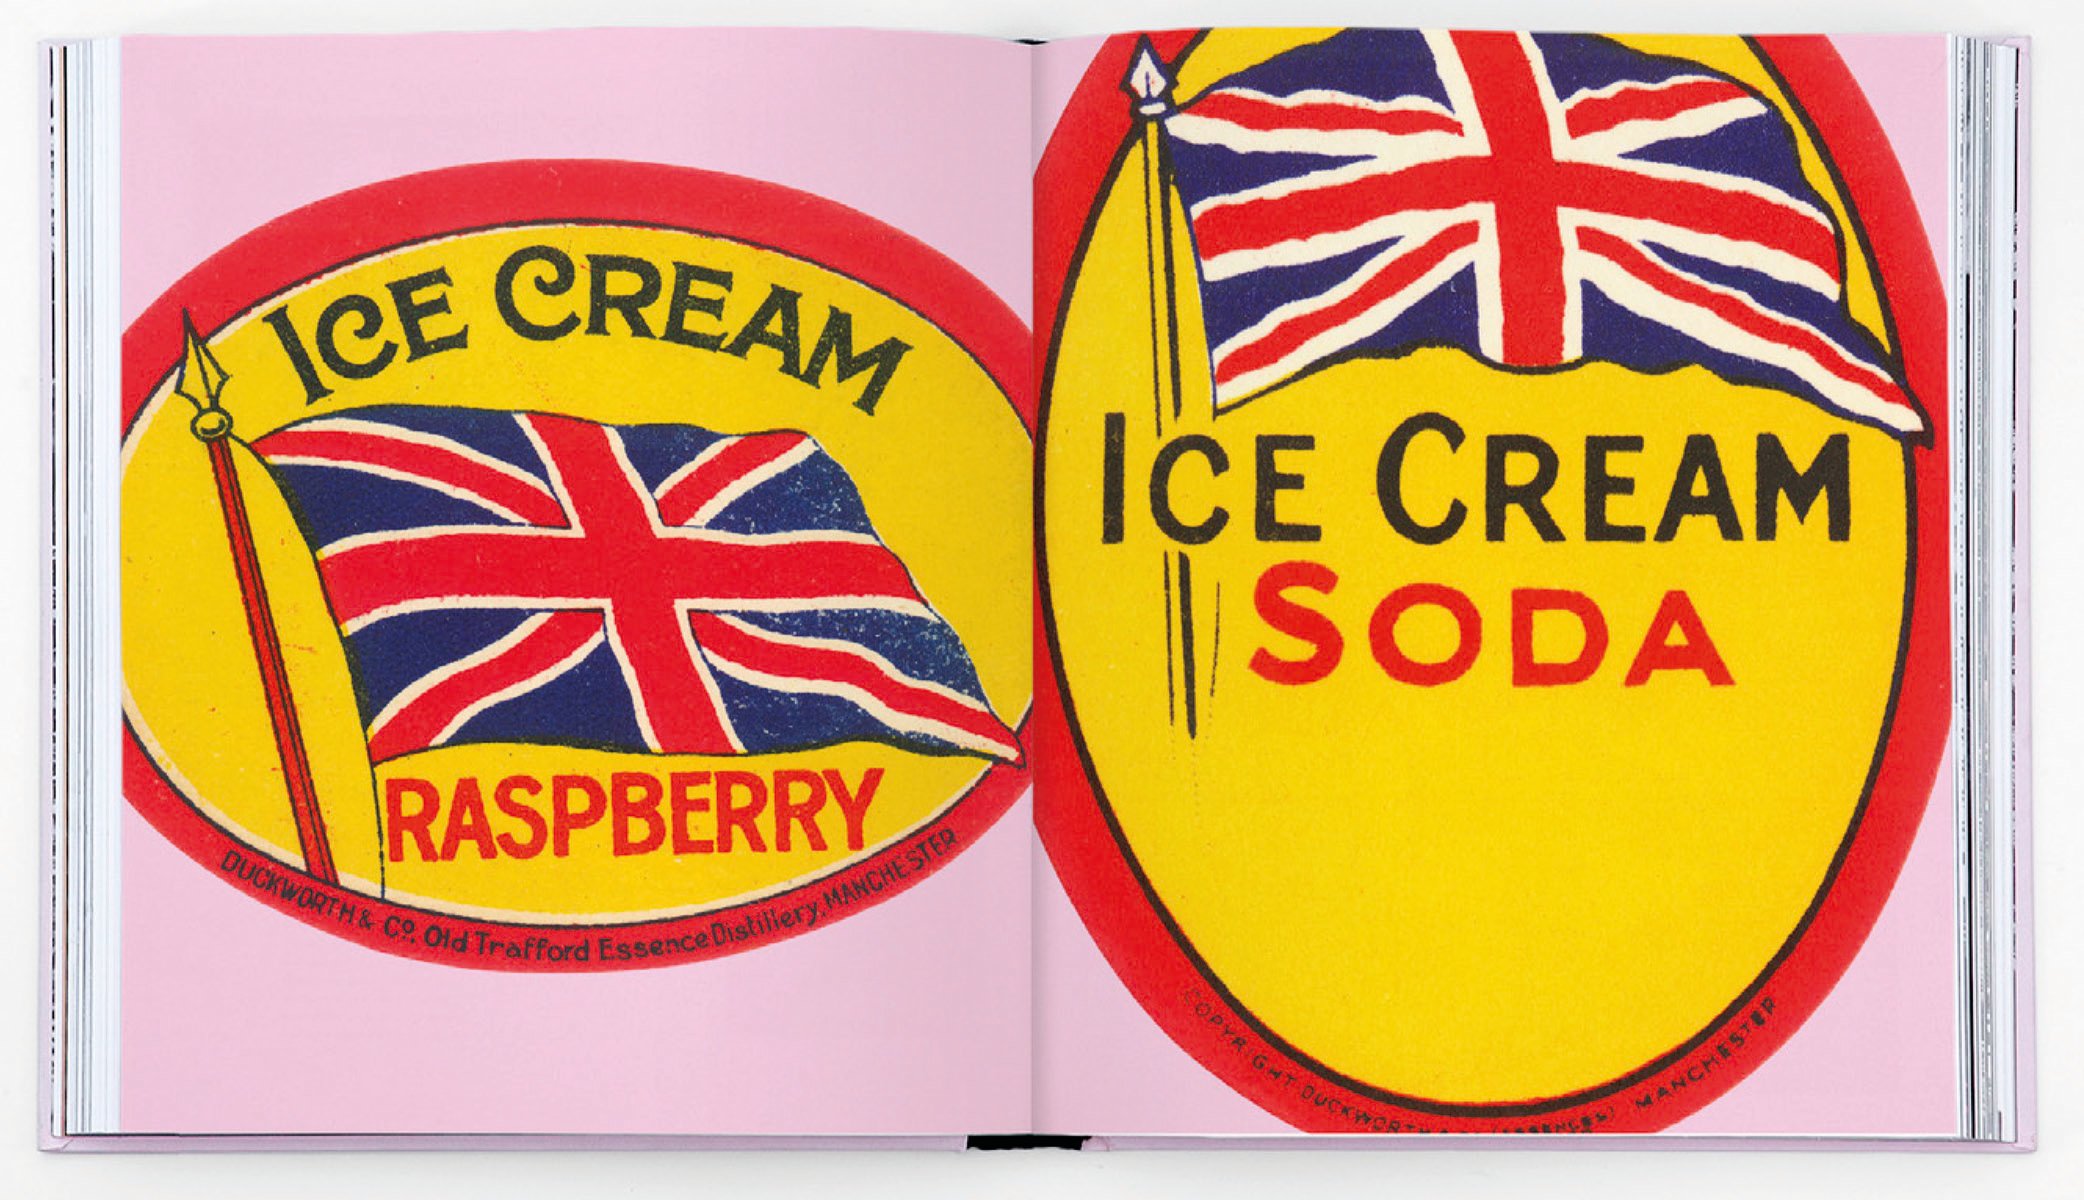 Blue red and white ice lolly graphic with tat* inspirational graphic ephemera in white font below.